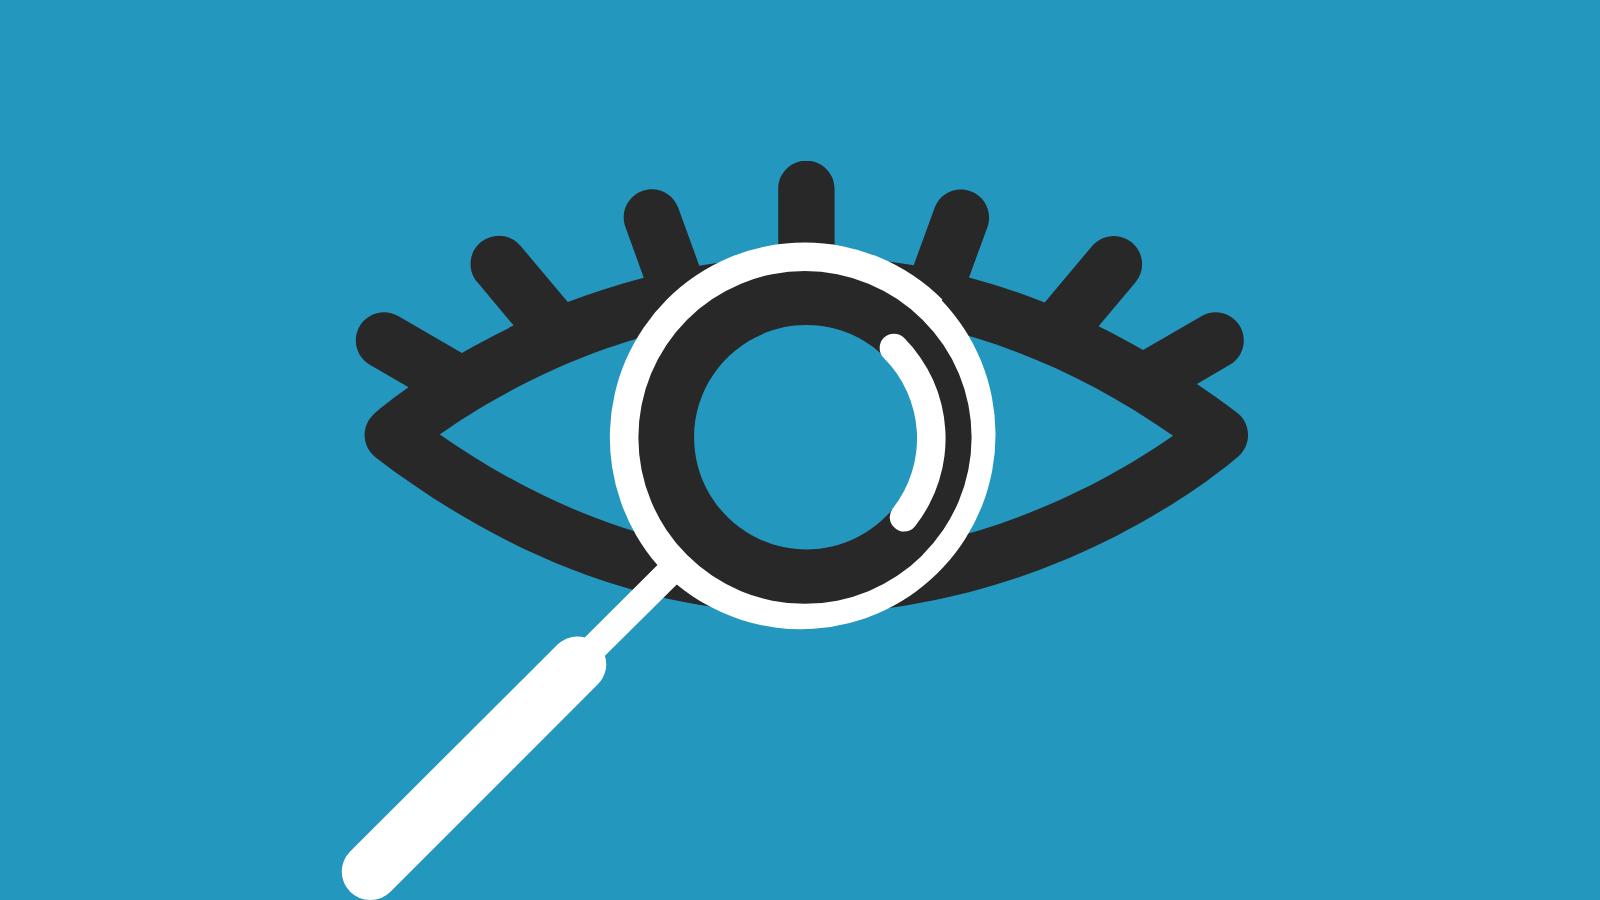 A graphic of a magnifying glass help up to an eye